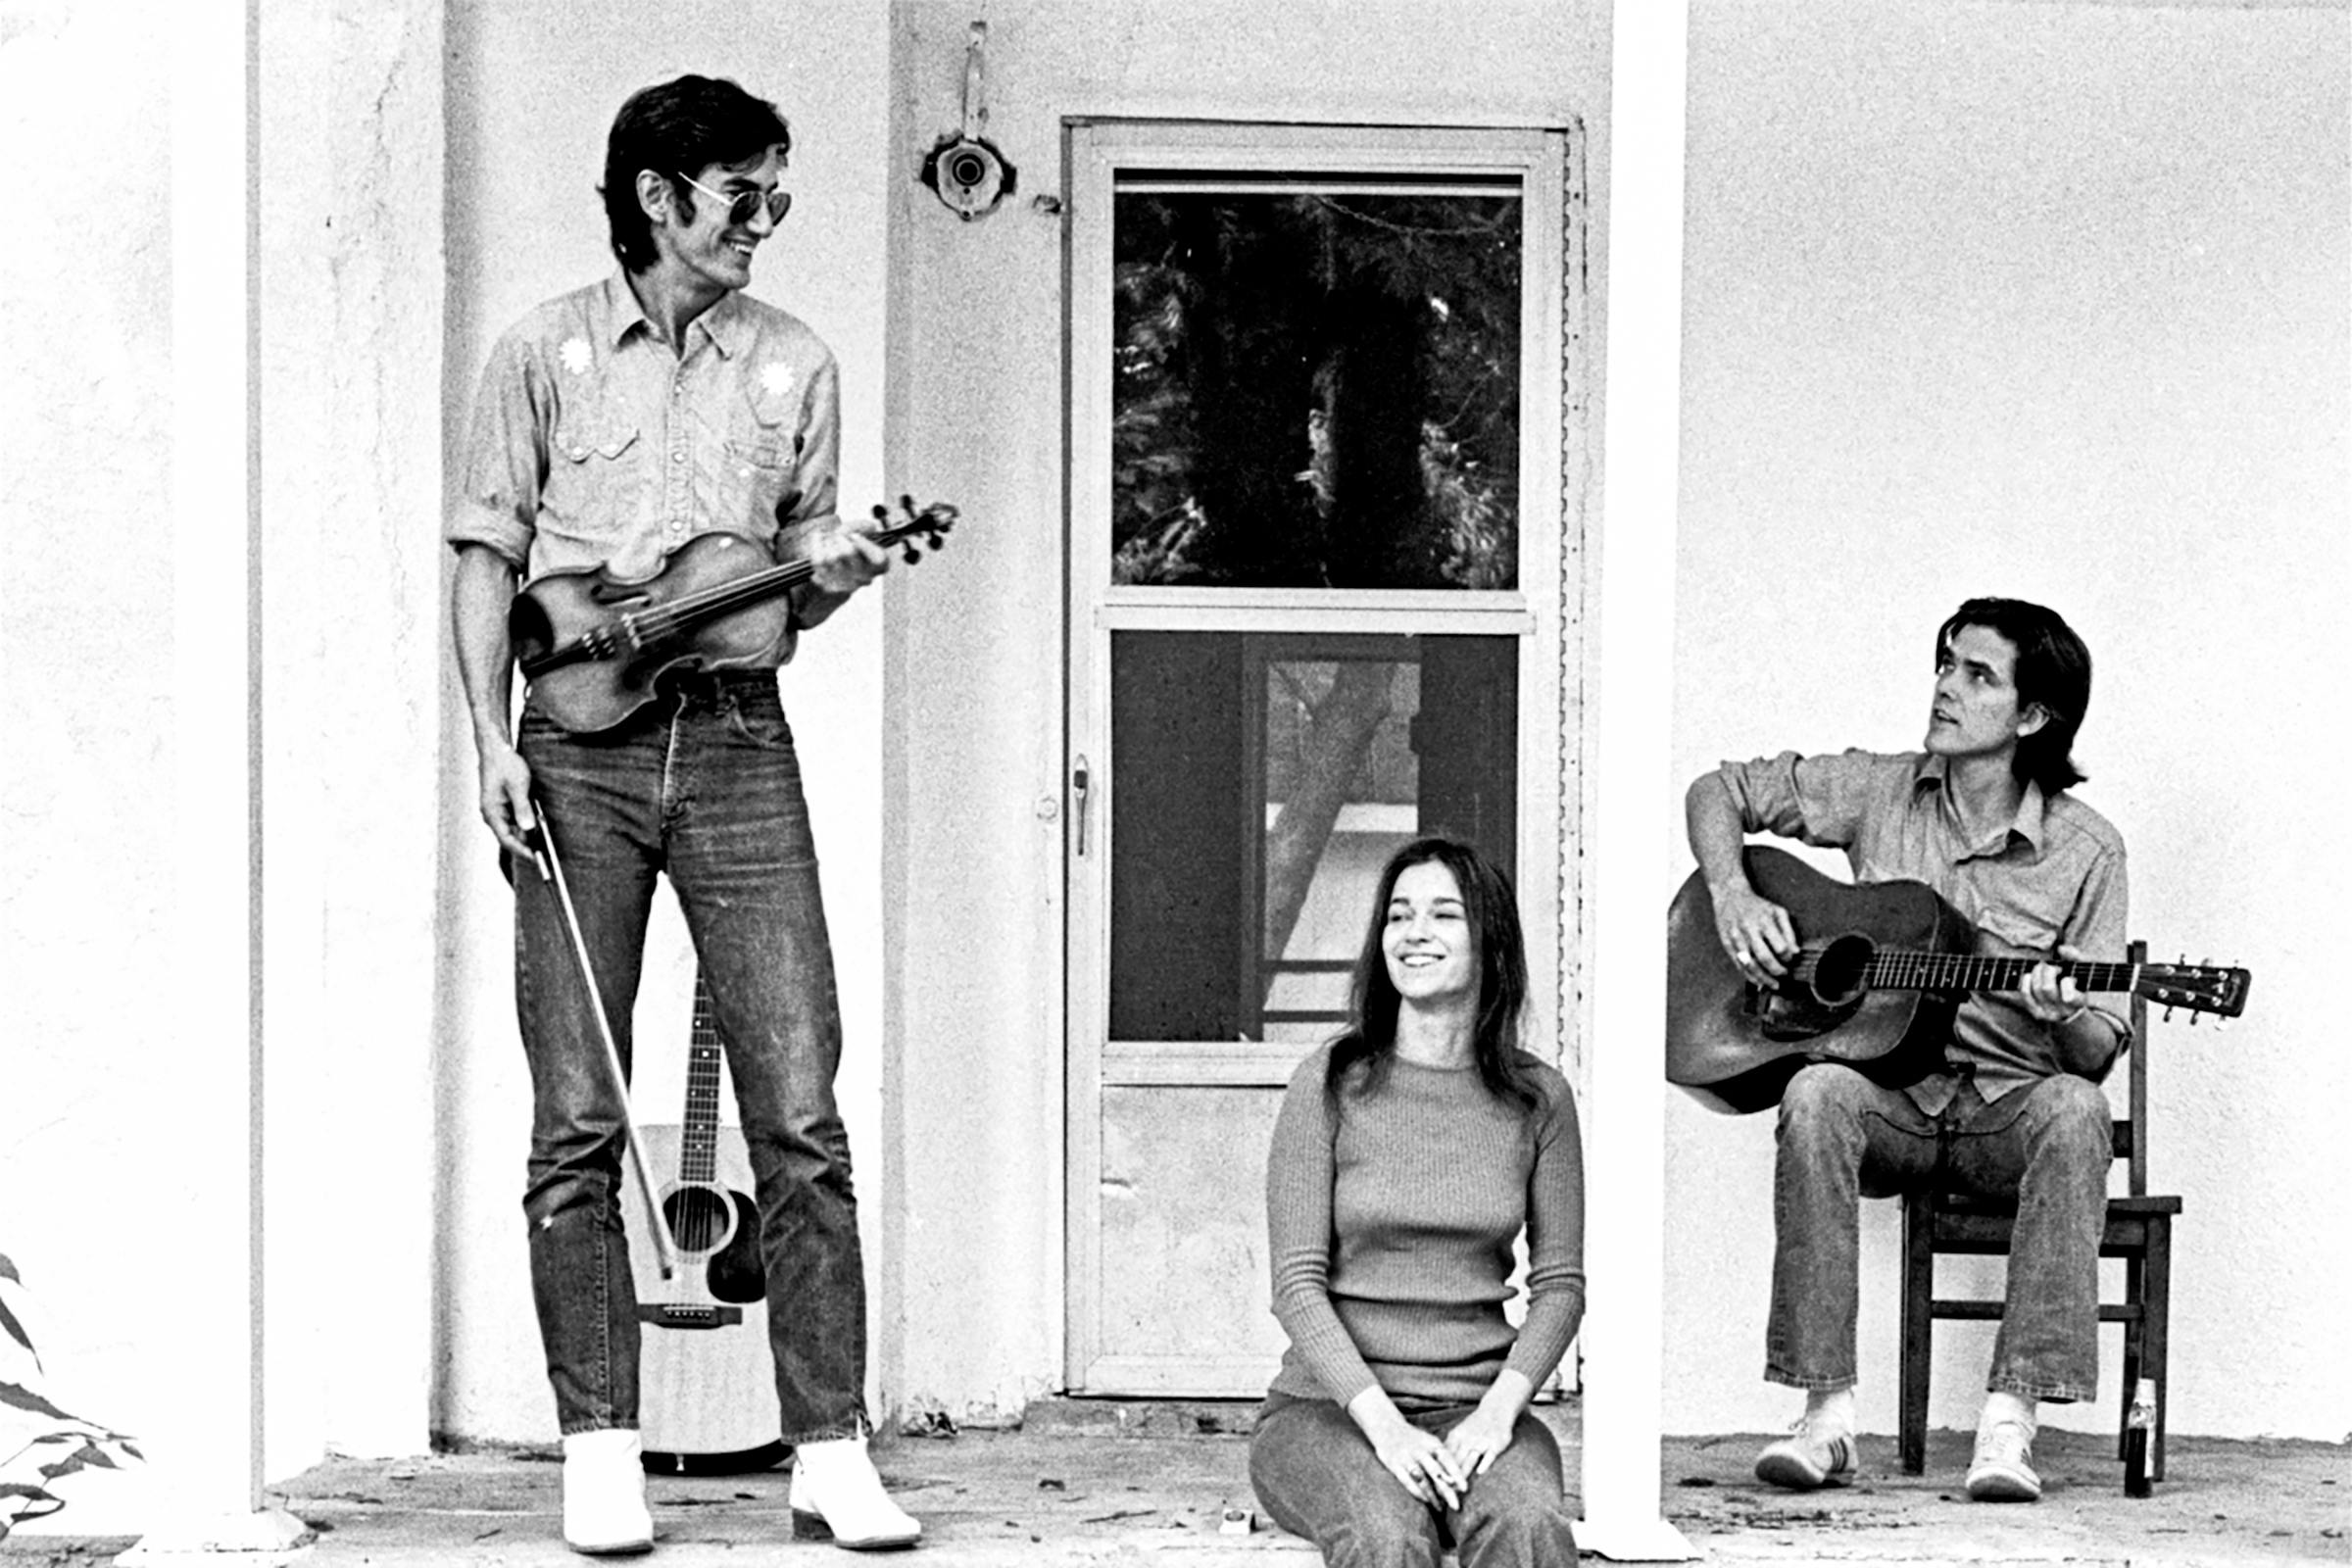 Townes Van Zandt with Susanna and Guy Clark at their house in East Nashville in Spring 1972.